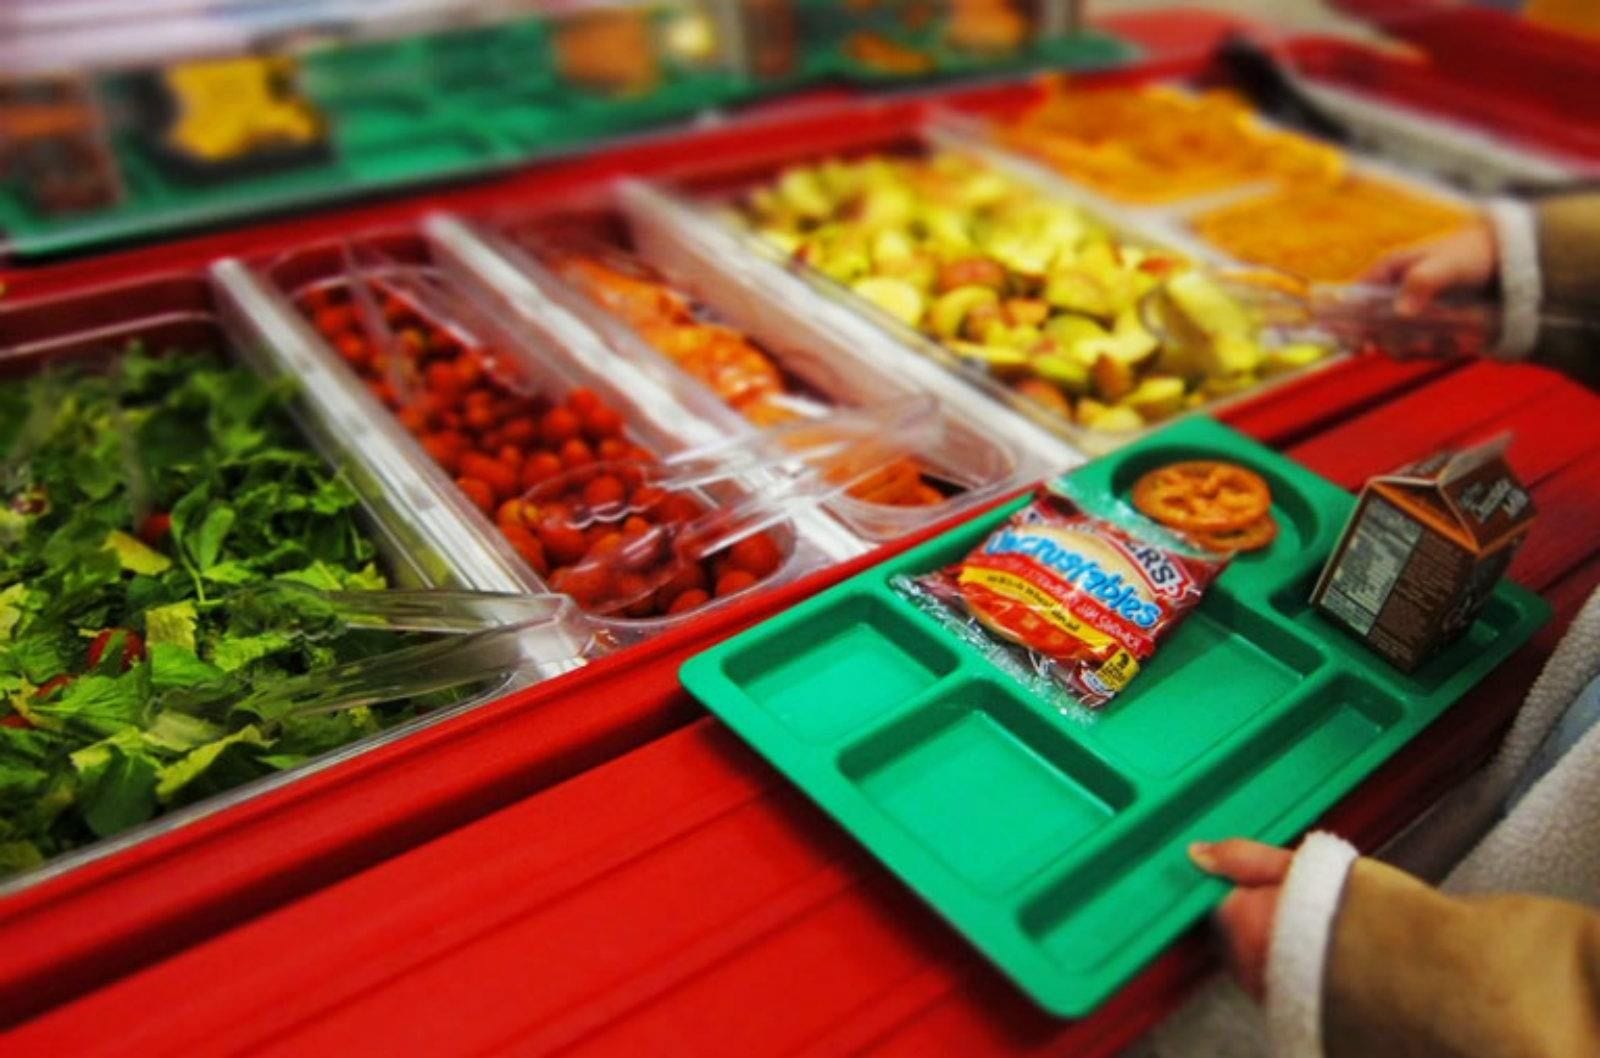 A young person carrying a tray chooses among many brightly colored fruit and vegetable options in a cafeteria setting.